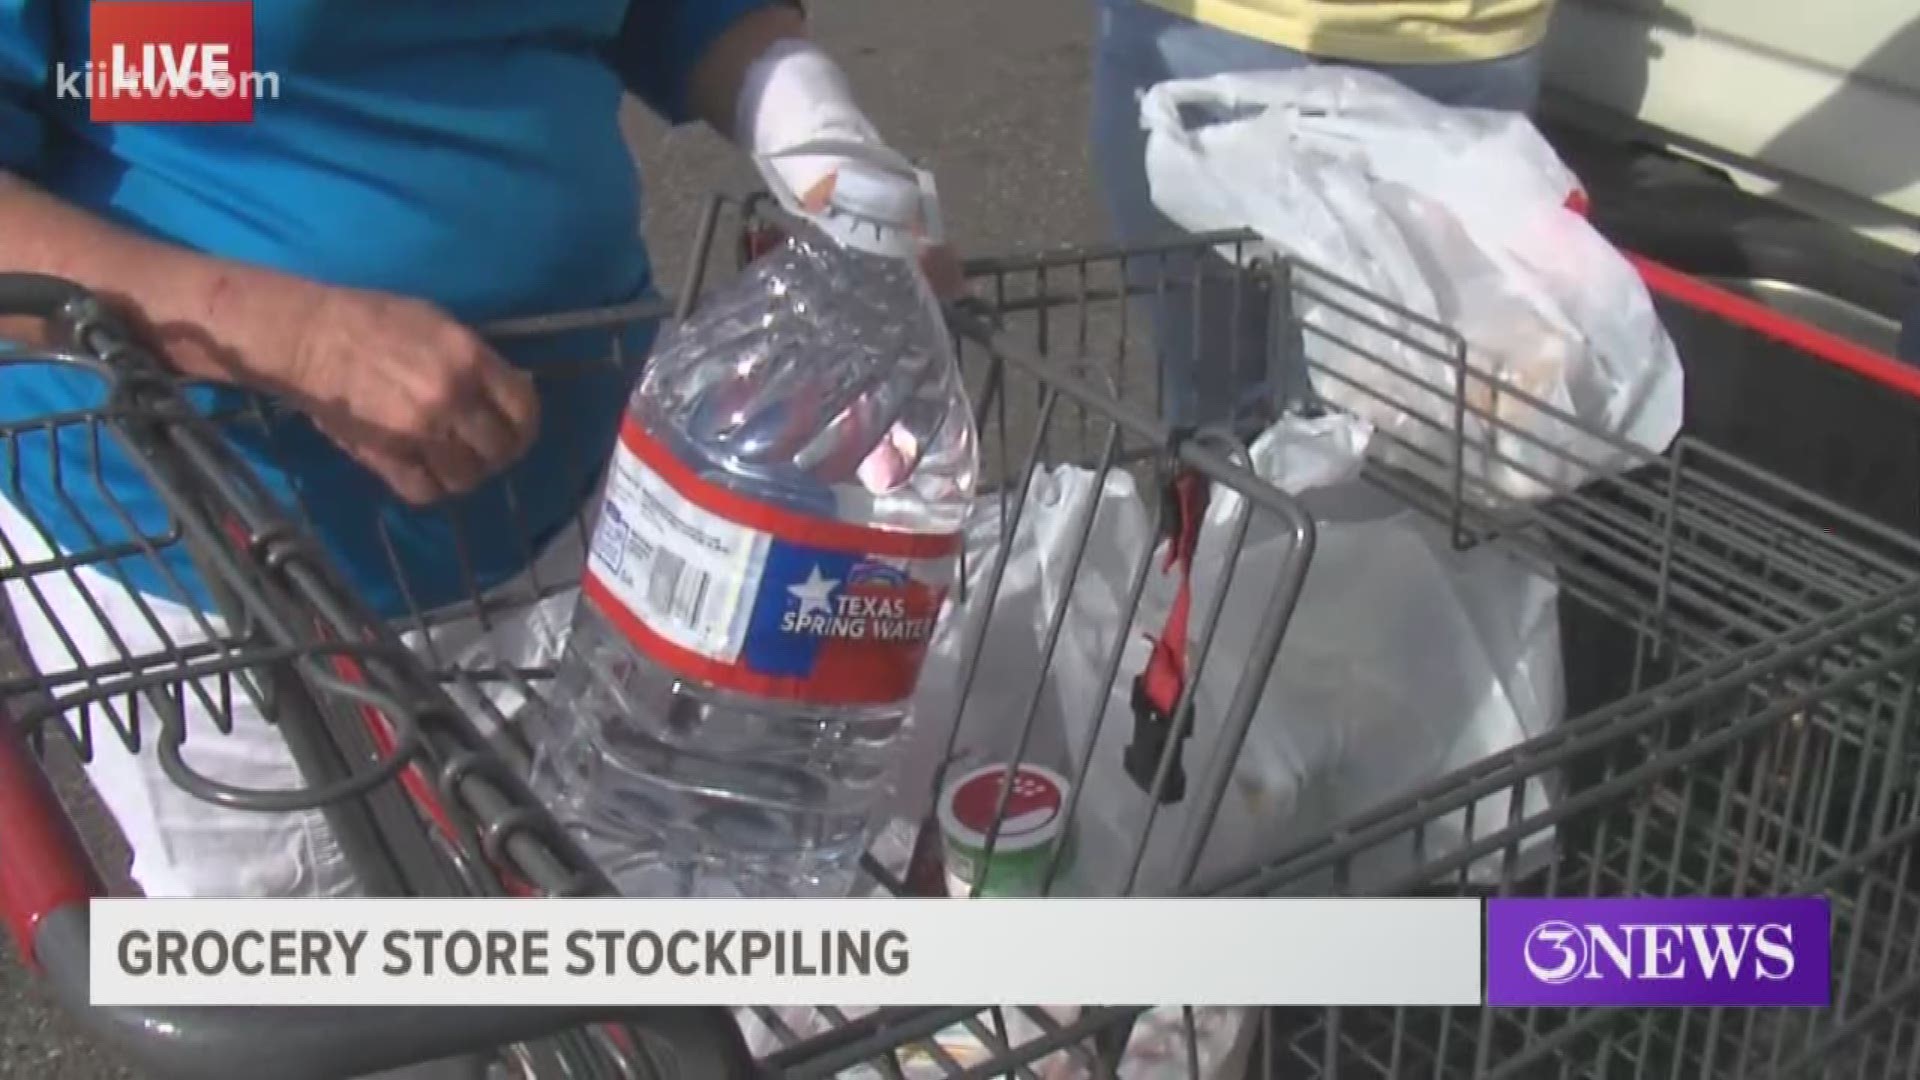 As of Tuesday, many Coastal Bend residents were still having trouble getting what they need from the grocery stores.